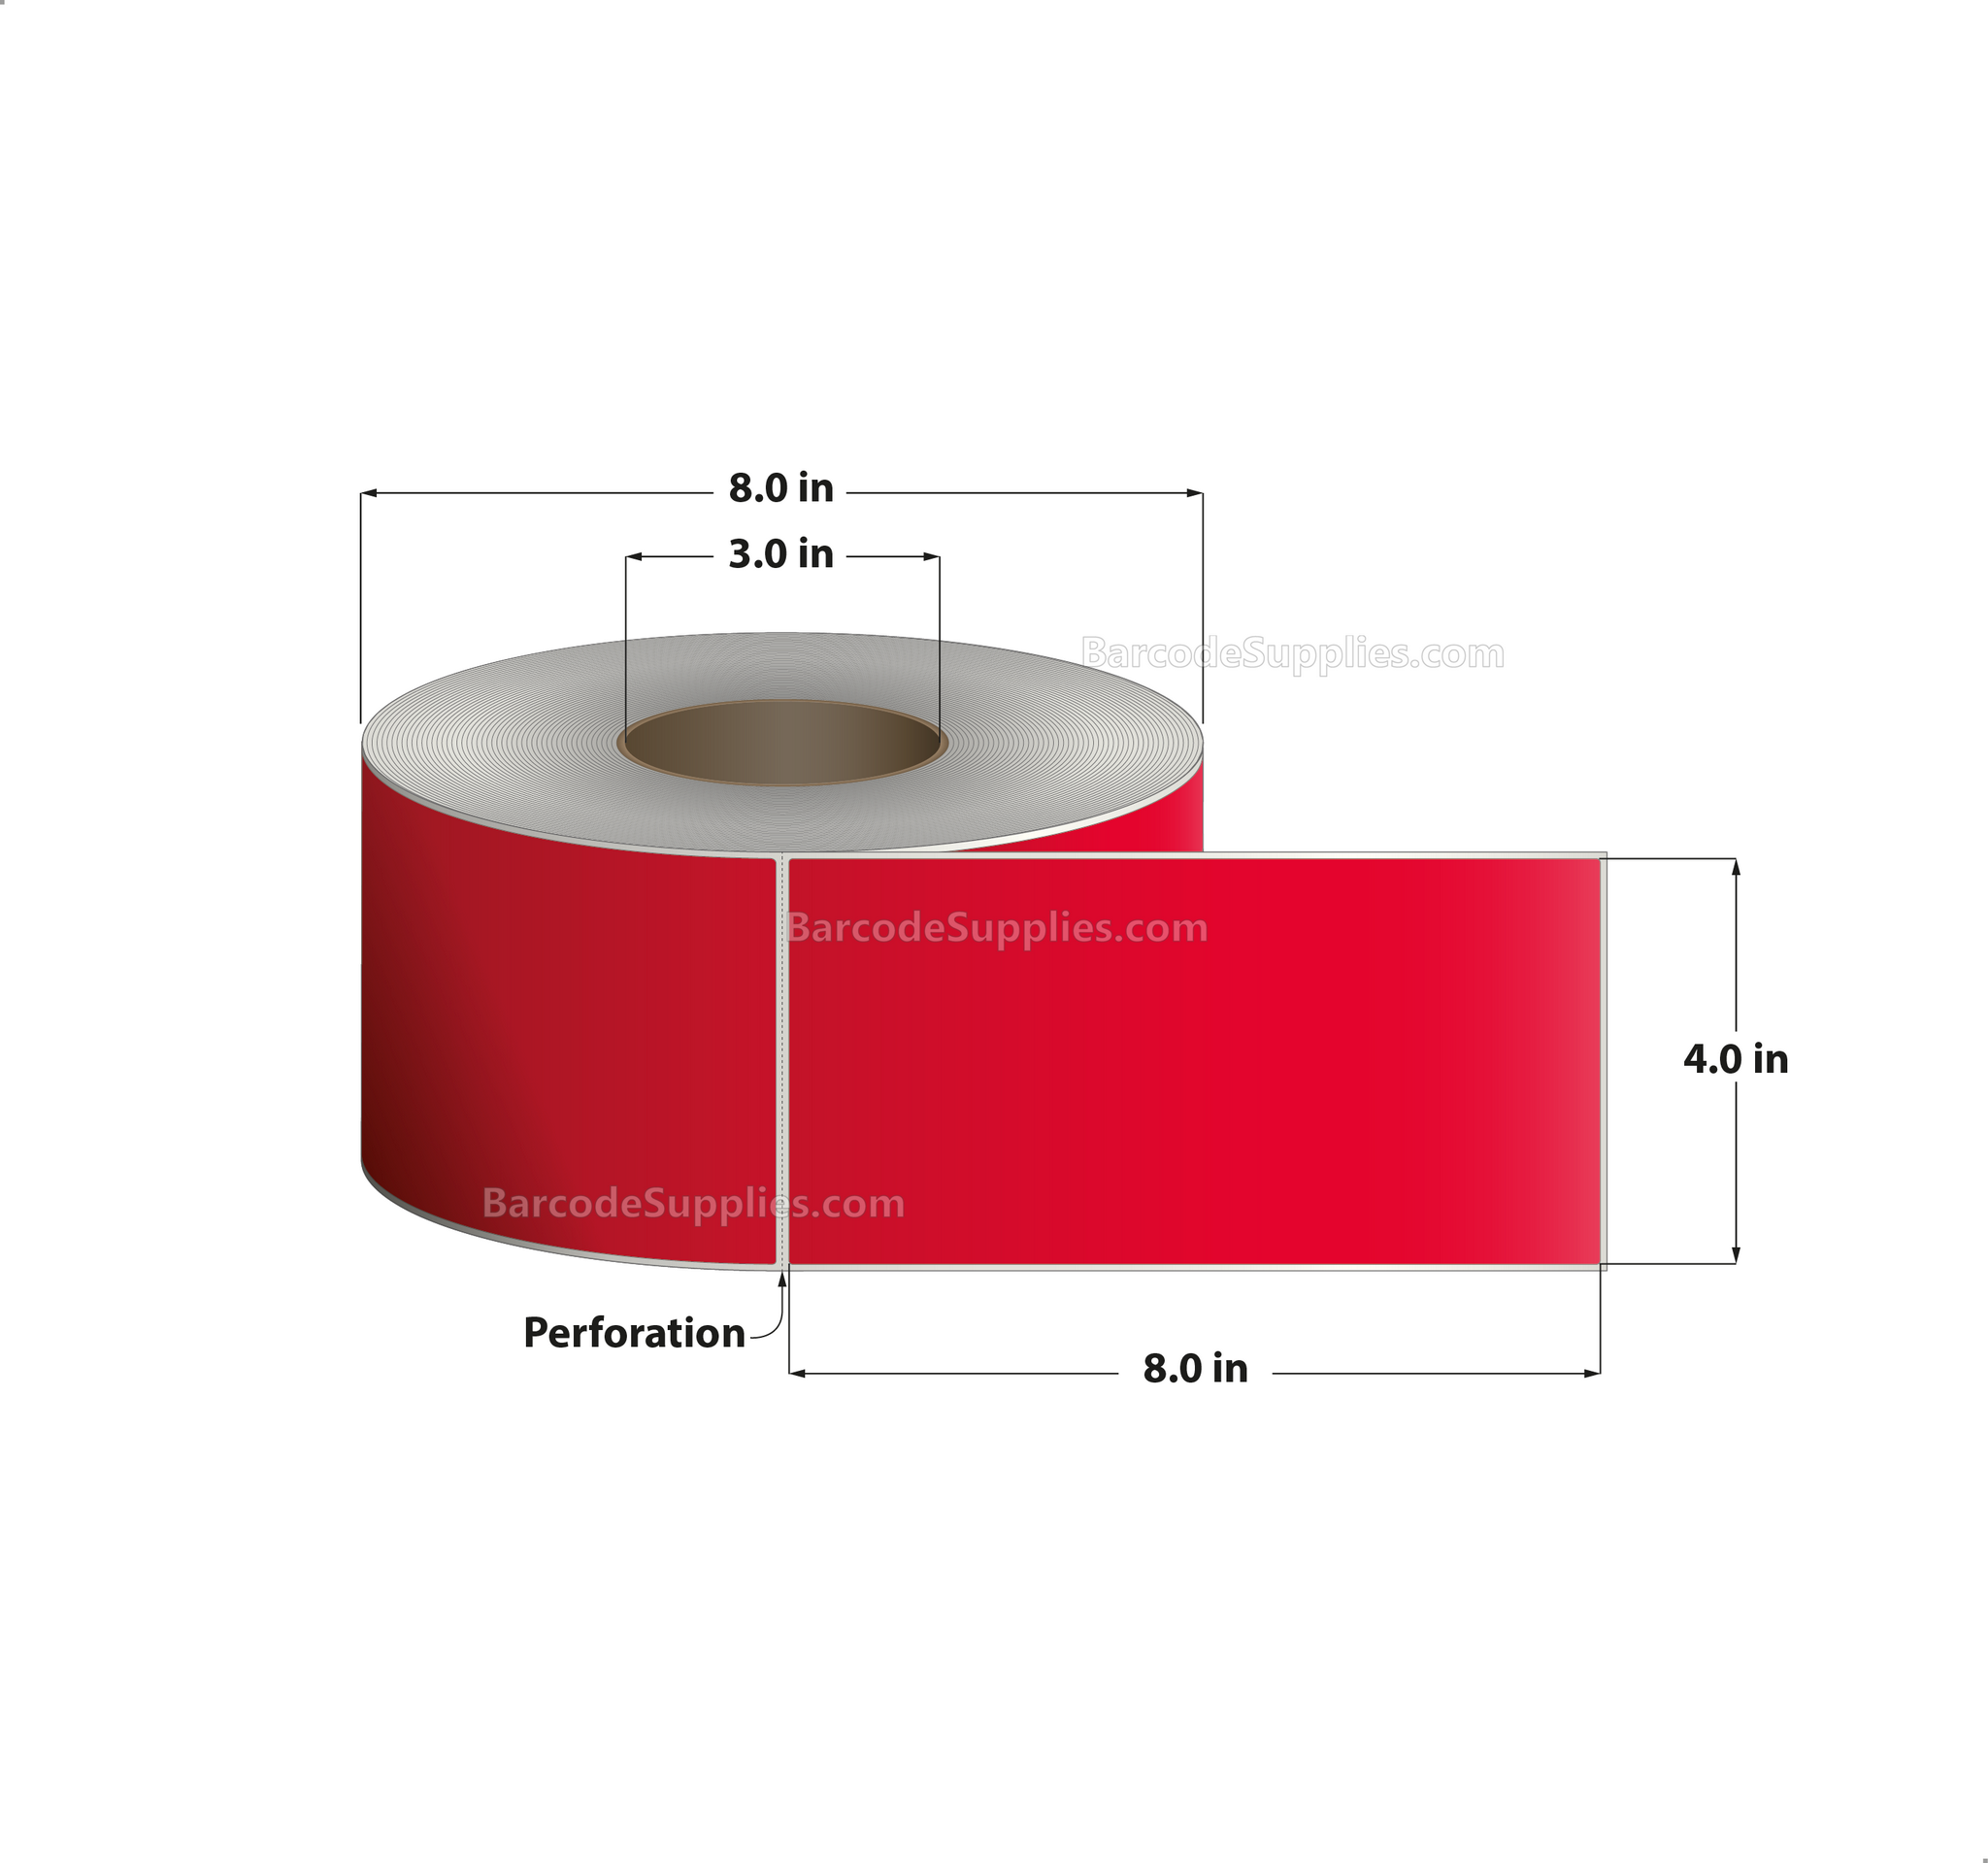 4 x 8 Thermal Transfer 032 Red Labels With Permanent Adhesive - Perforated - 750 Labels Per Roll - Carton Of 4 Rolls - 3000 Labels Total - MPN: RFC-4-8-750-RD